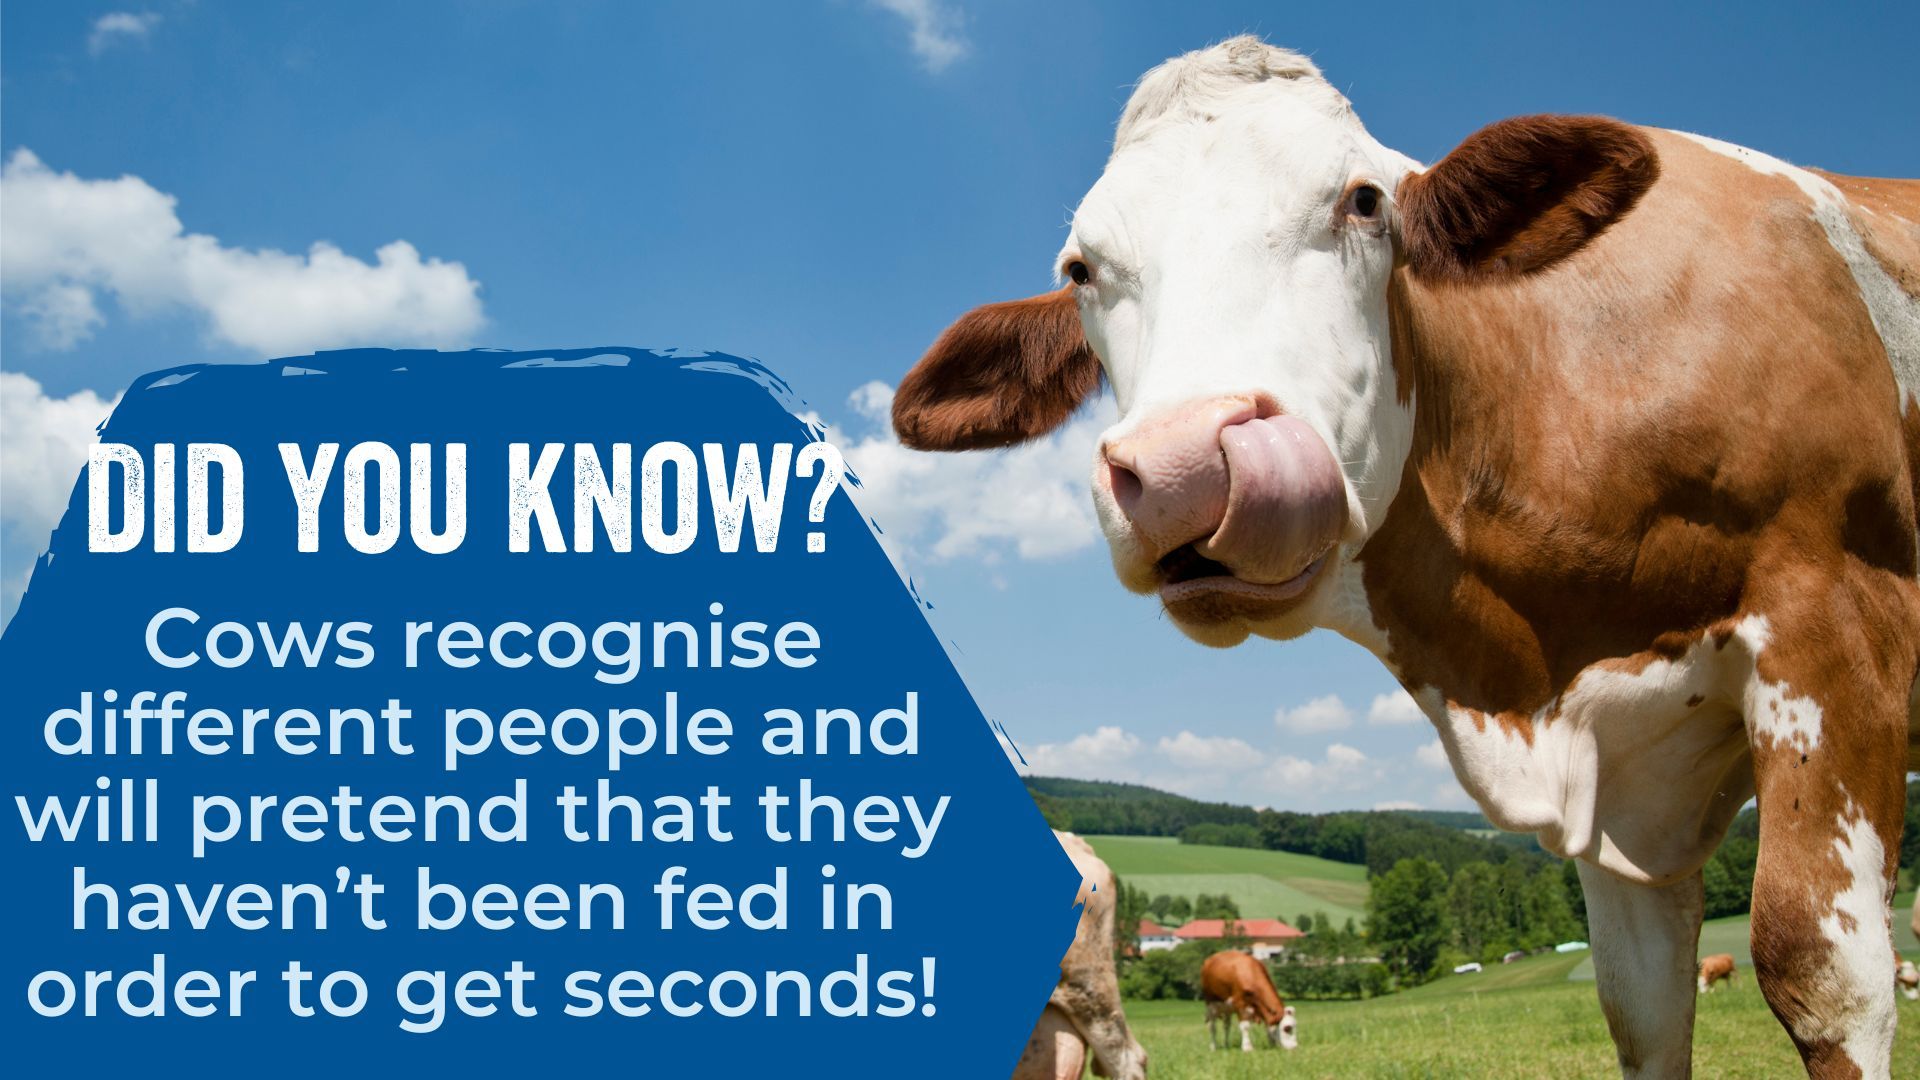 Cows recognise different people and will pretend that they haven’t been fed in order to get seconds!